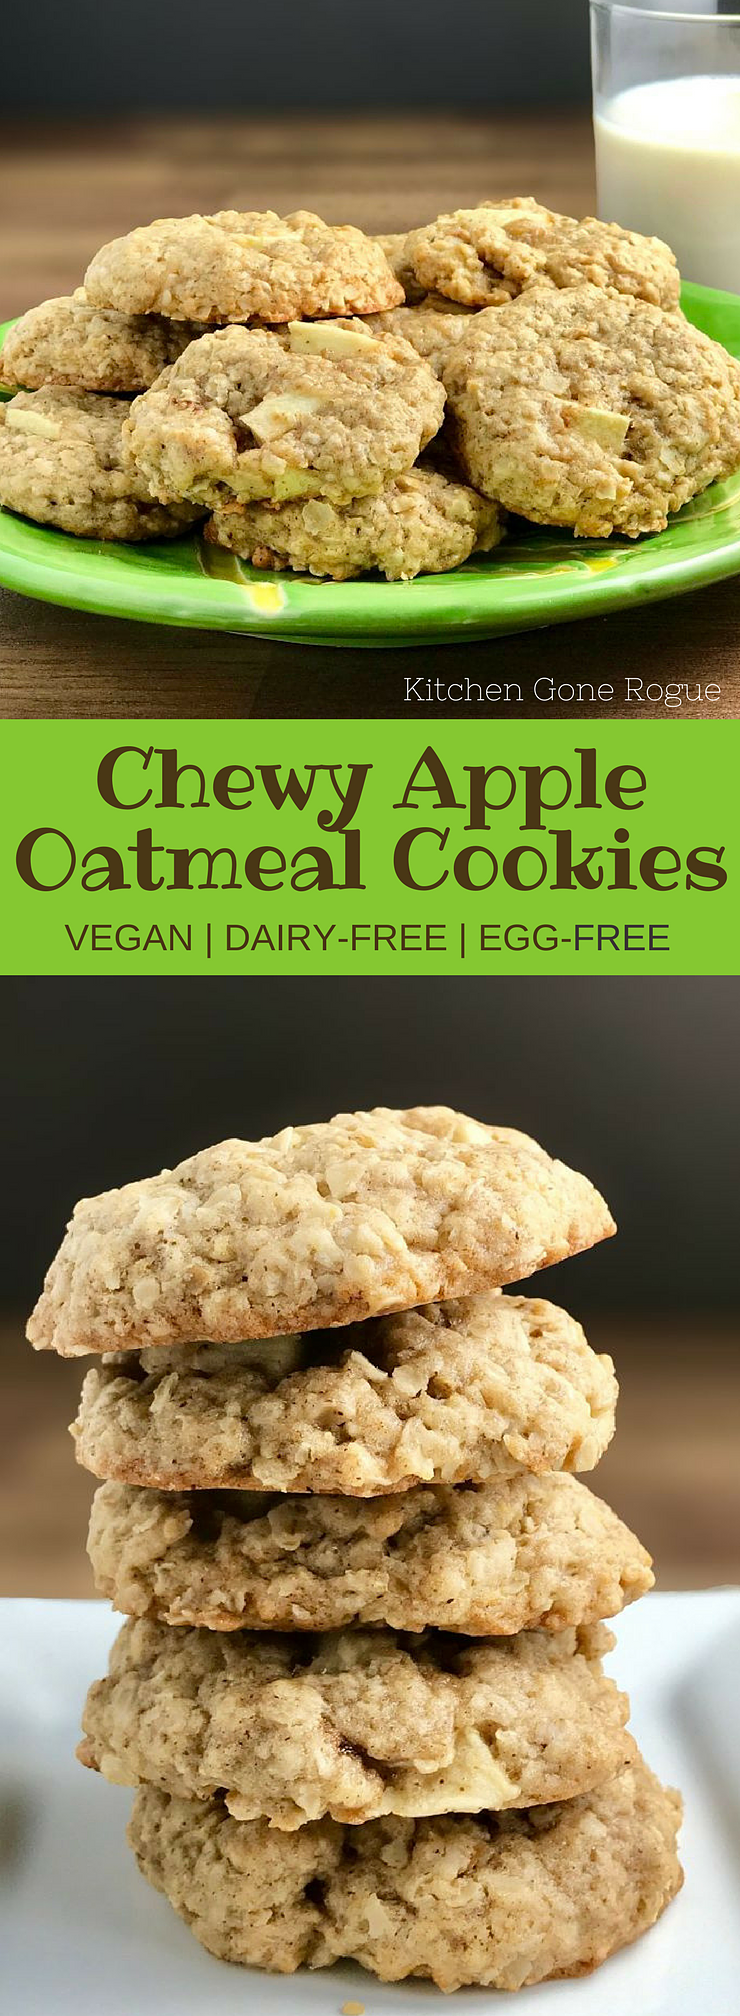 Vegan Chewy Apple Oatmeal Cookies - Kitchen Gone Rogue